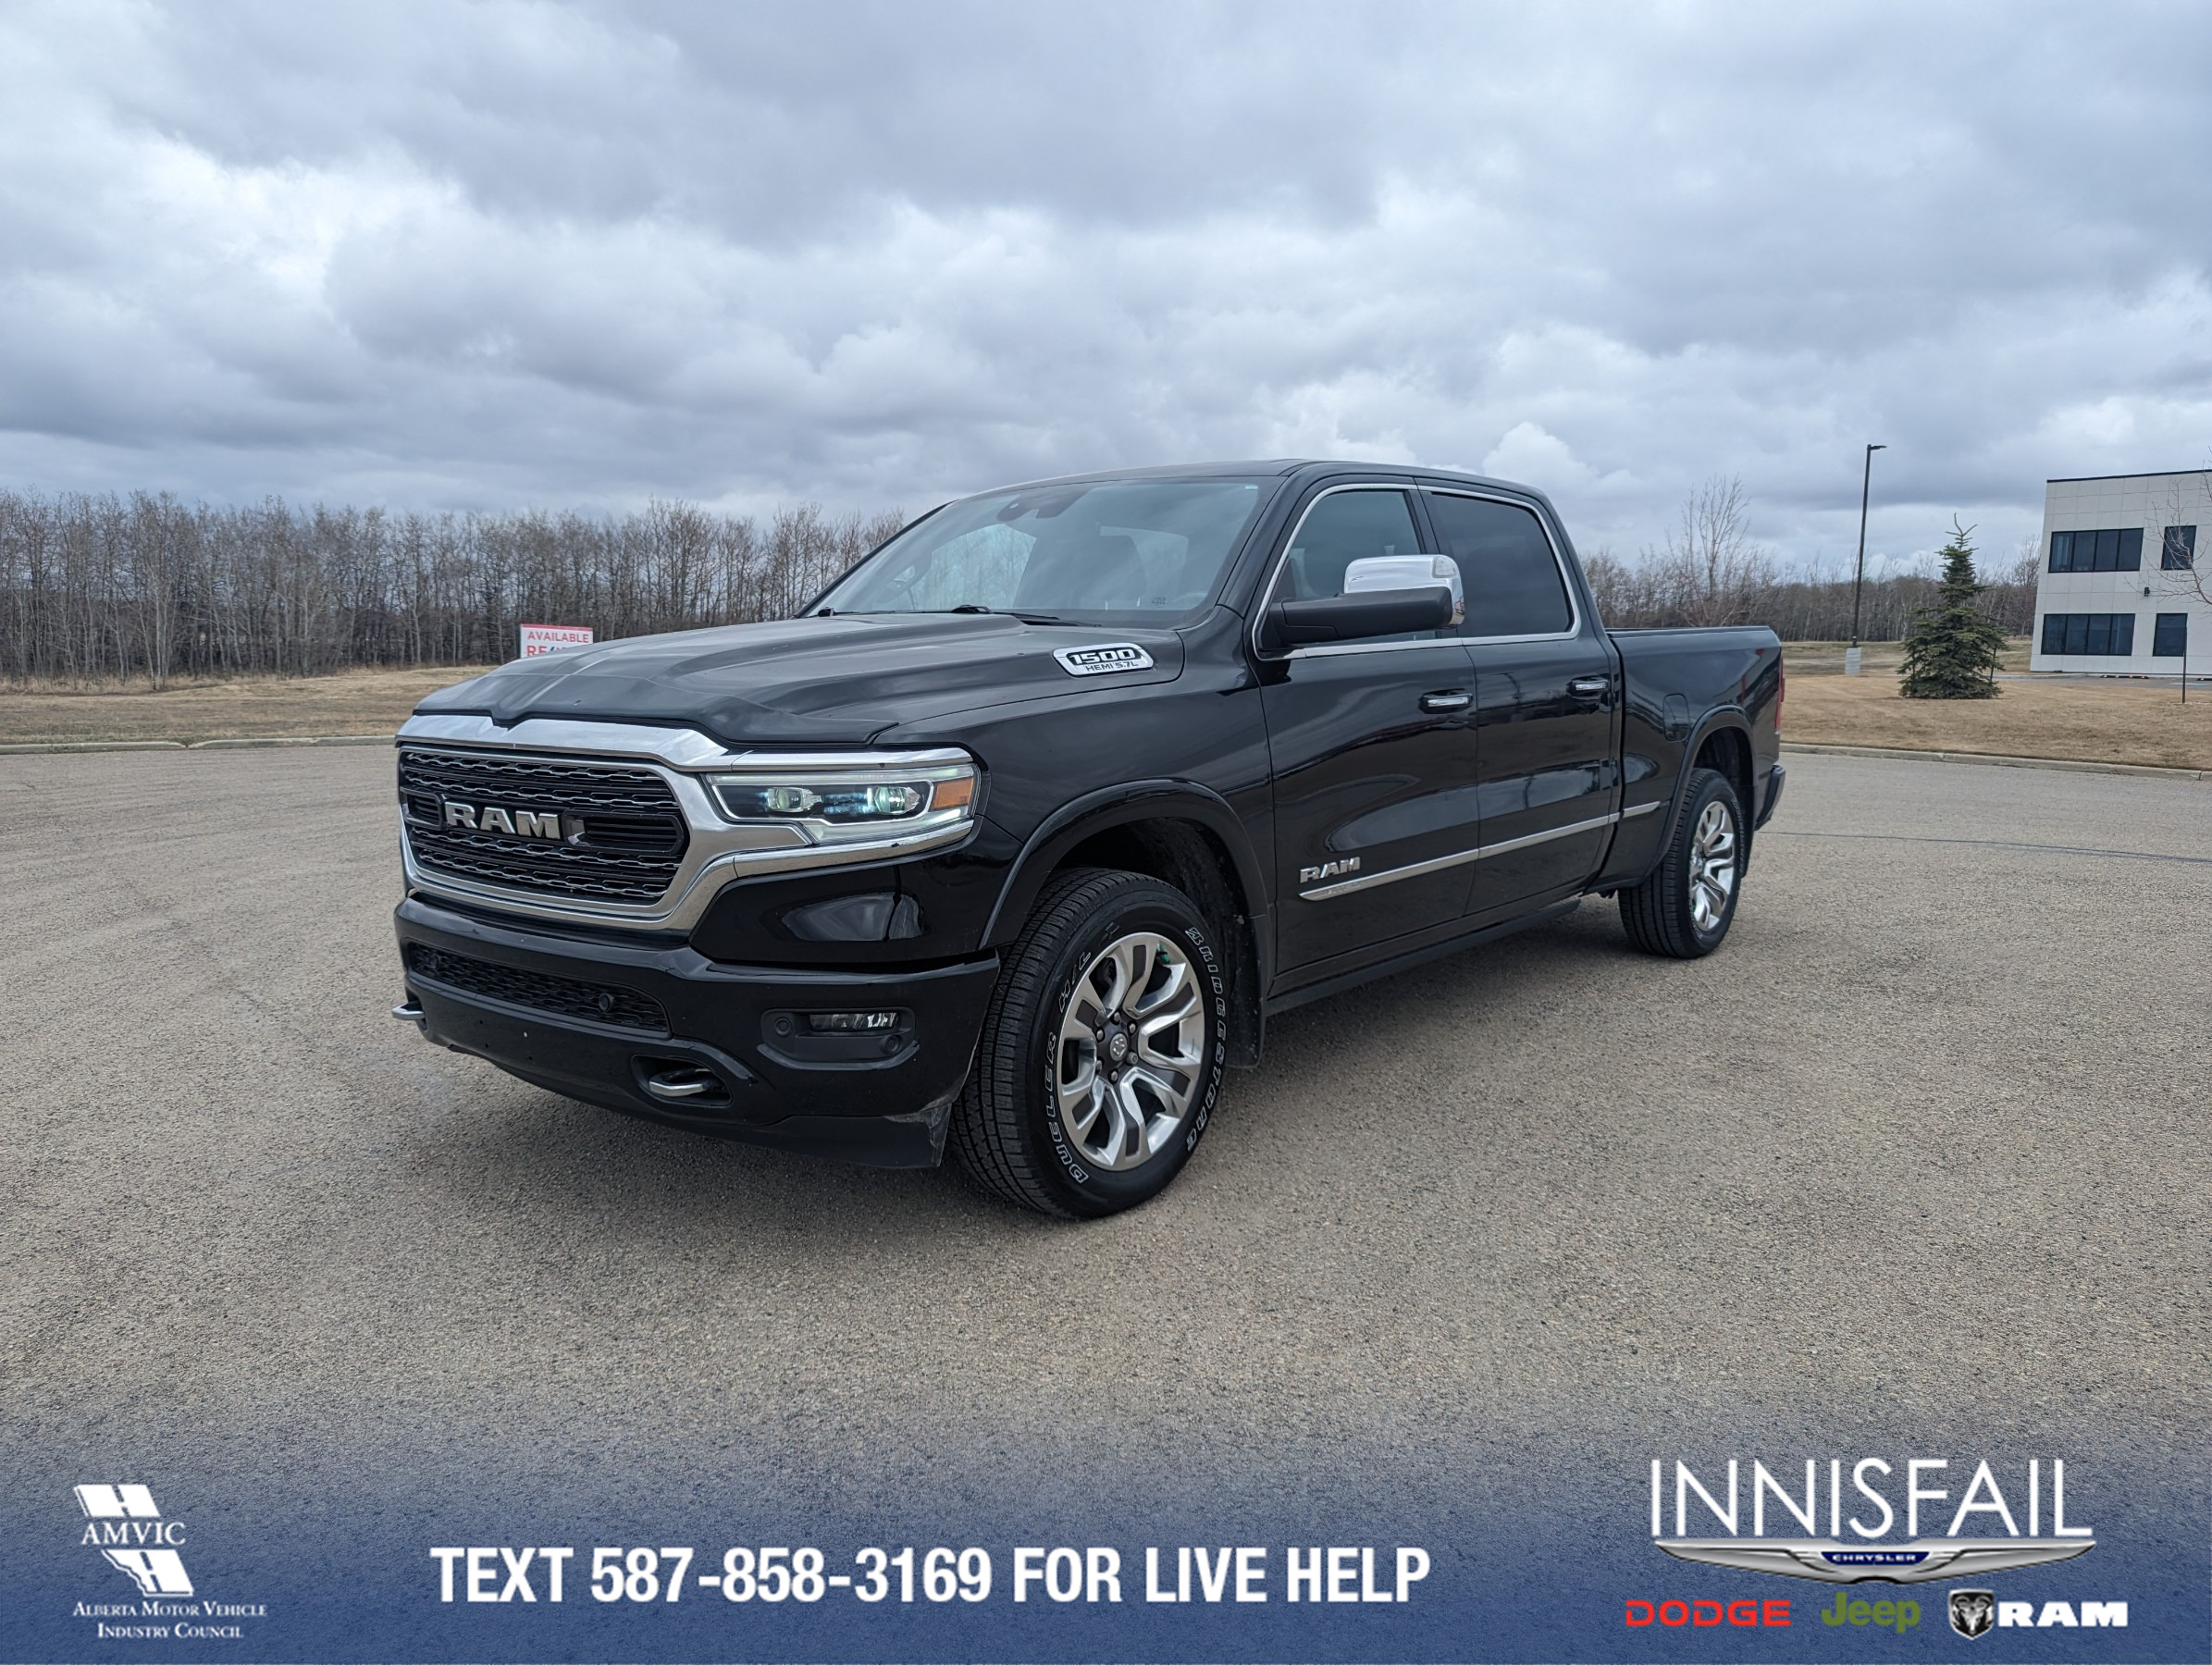 2019 Ram 1500 Limited Trailer Tow Package! Adaptive Cruise! 19-S